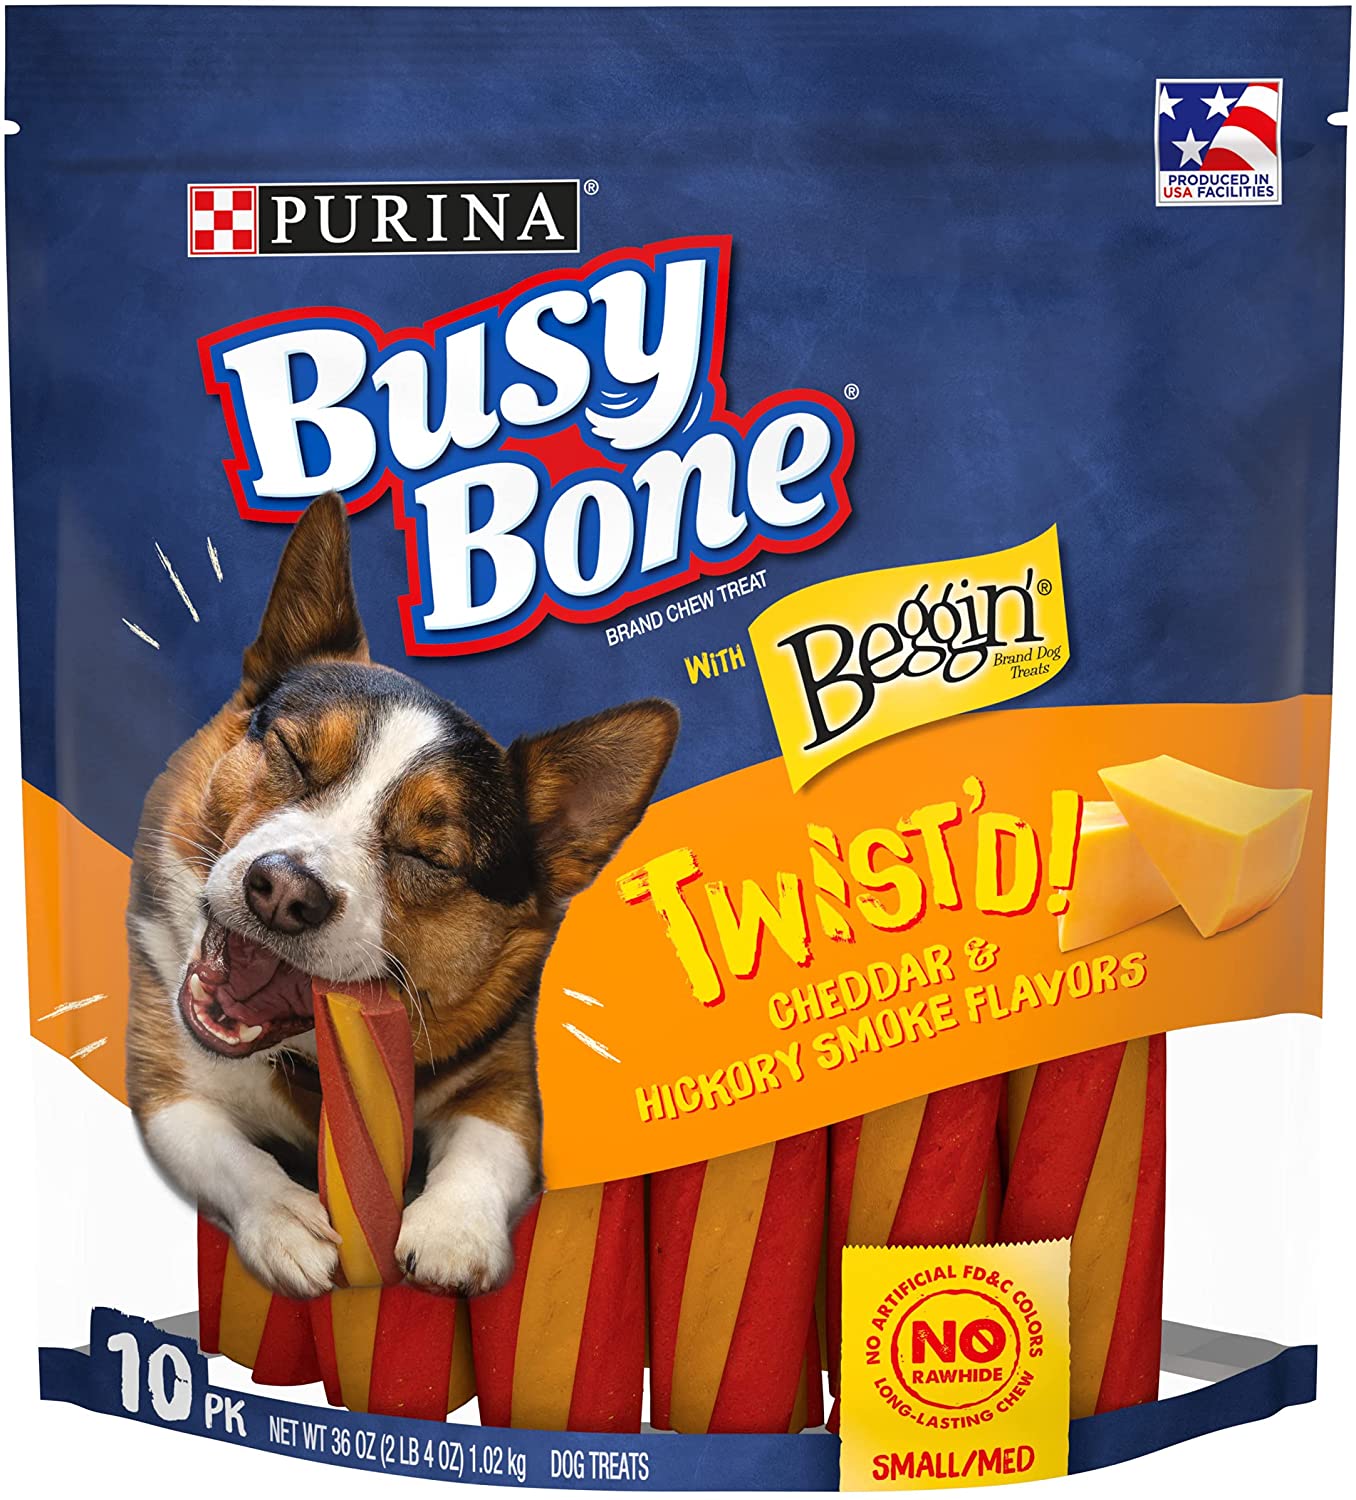 10-Pack Purina Busy Bone w/ Beggin' Twist'd Cheddar & Hickory Smoke Dog Treats $2.20 w/ S&S + Free Shipping w/ Amazon Prime or Orders $25+